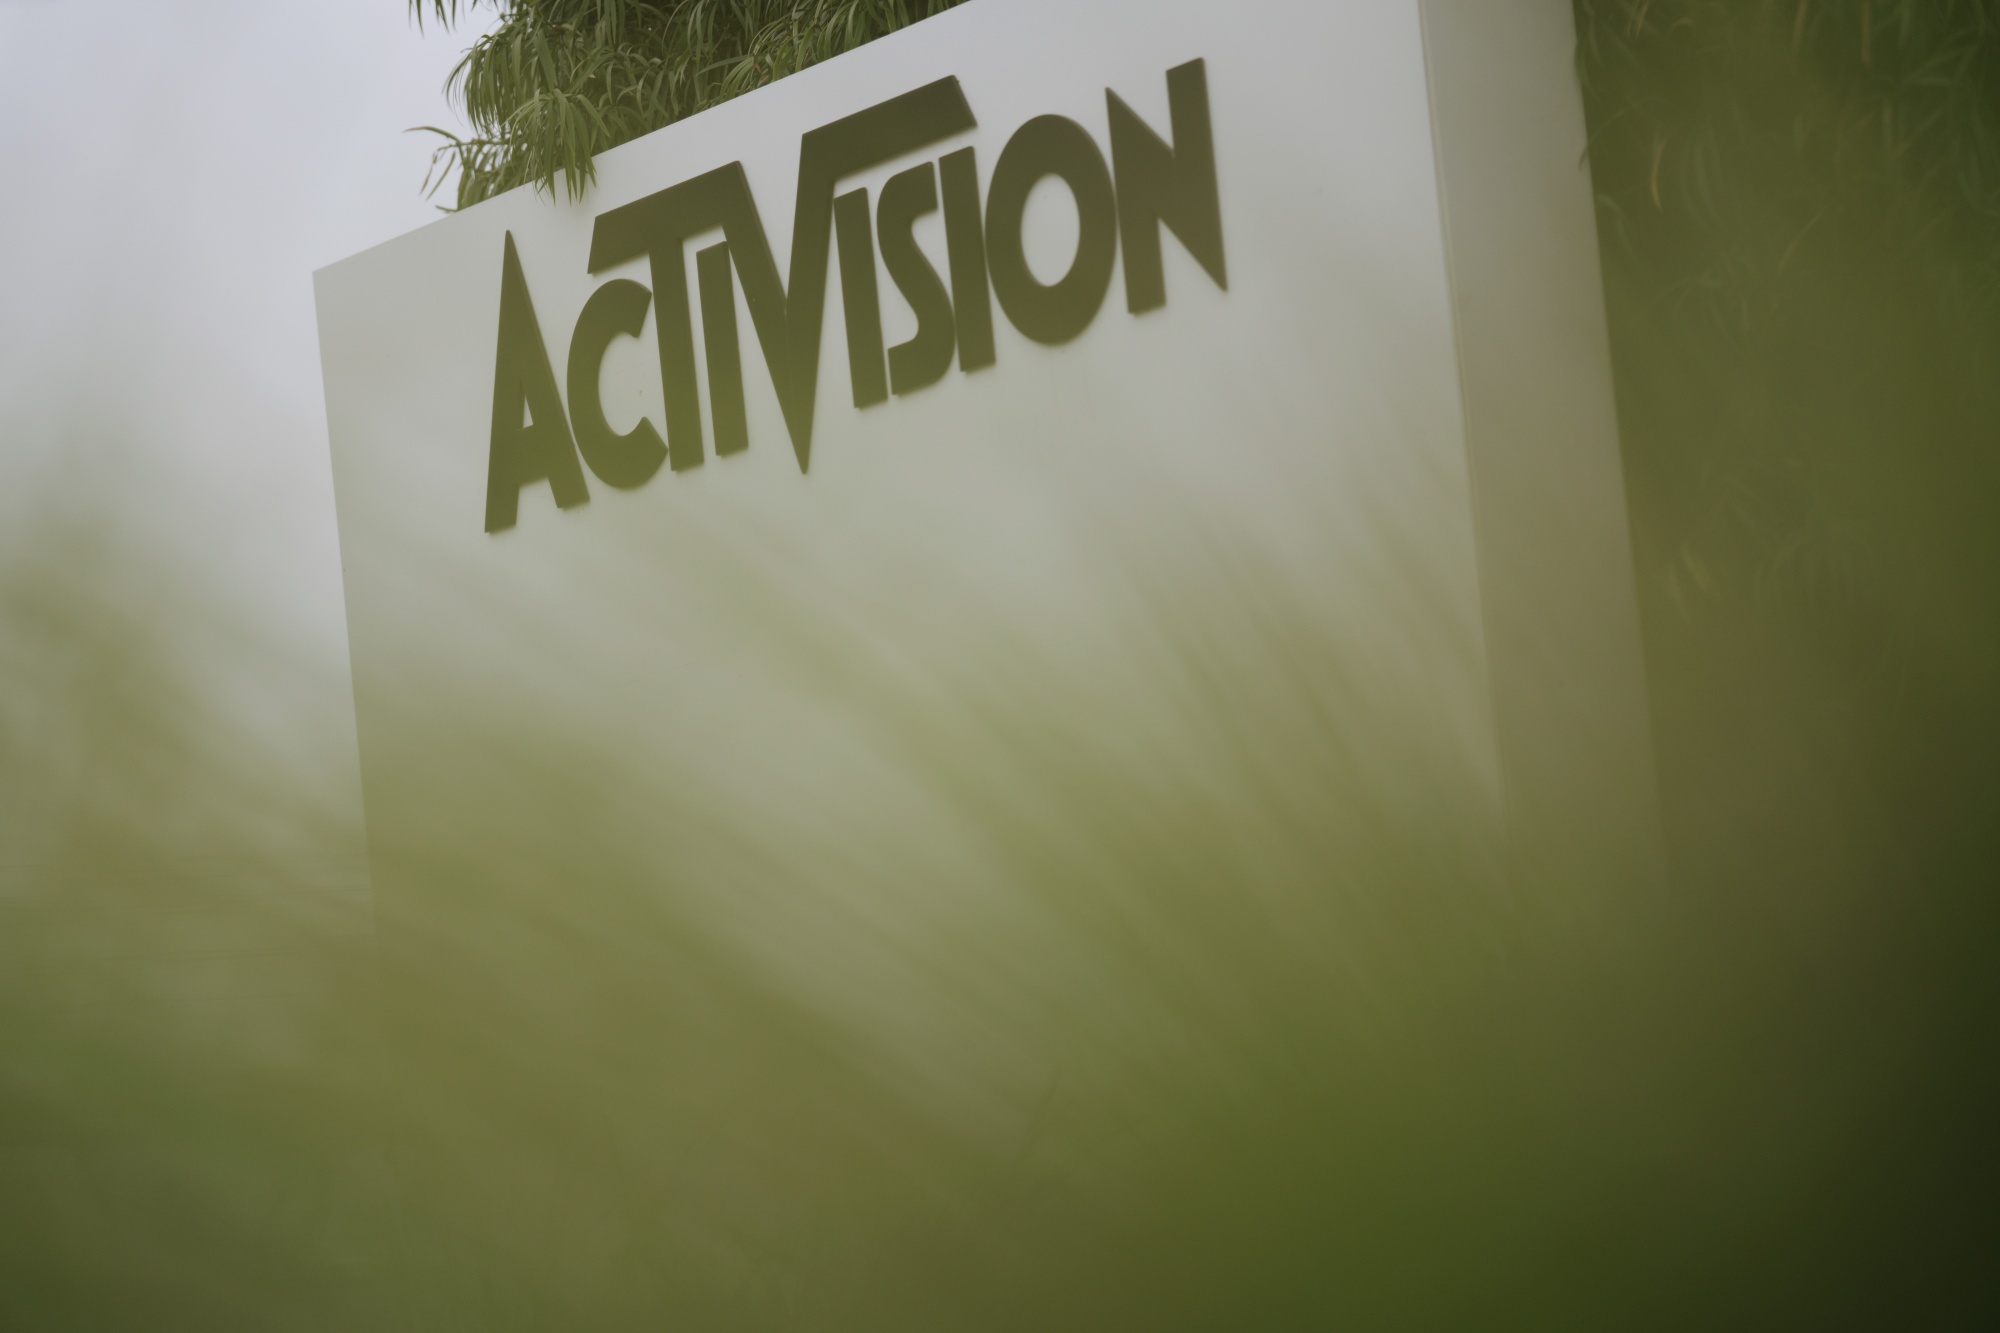 Microsoft's $69 Billion Activision Deal Cleared by UK - Bloomberg